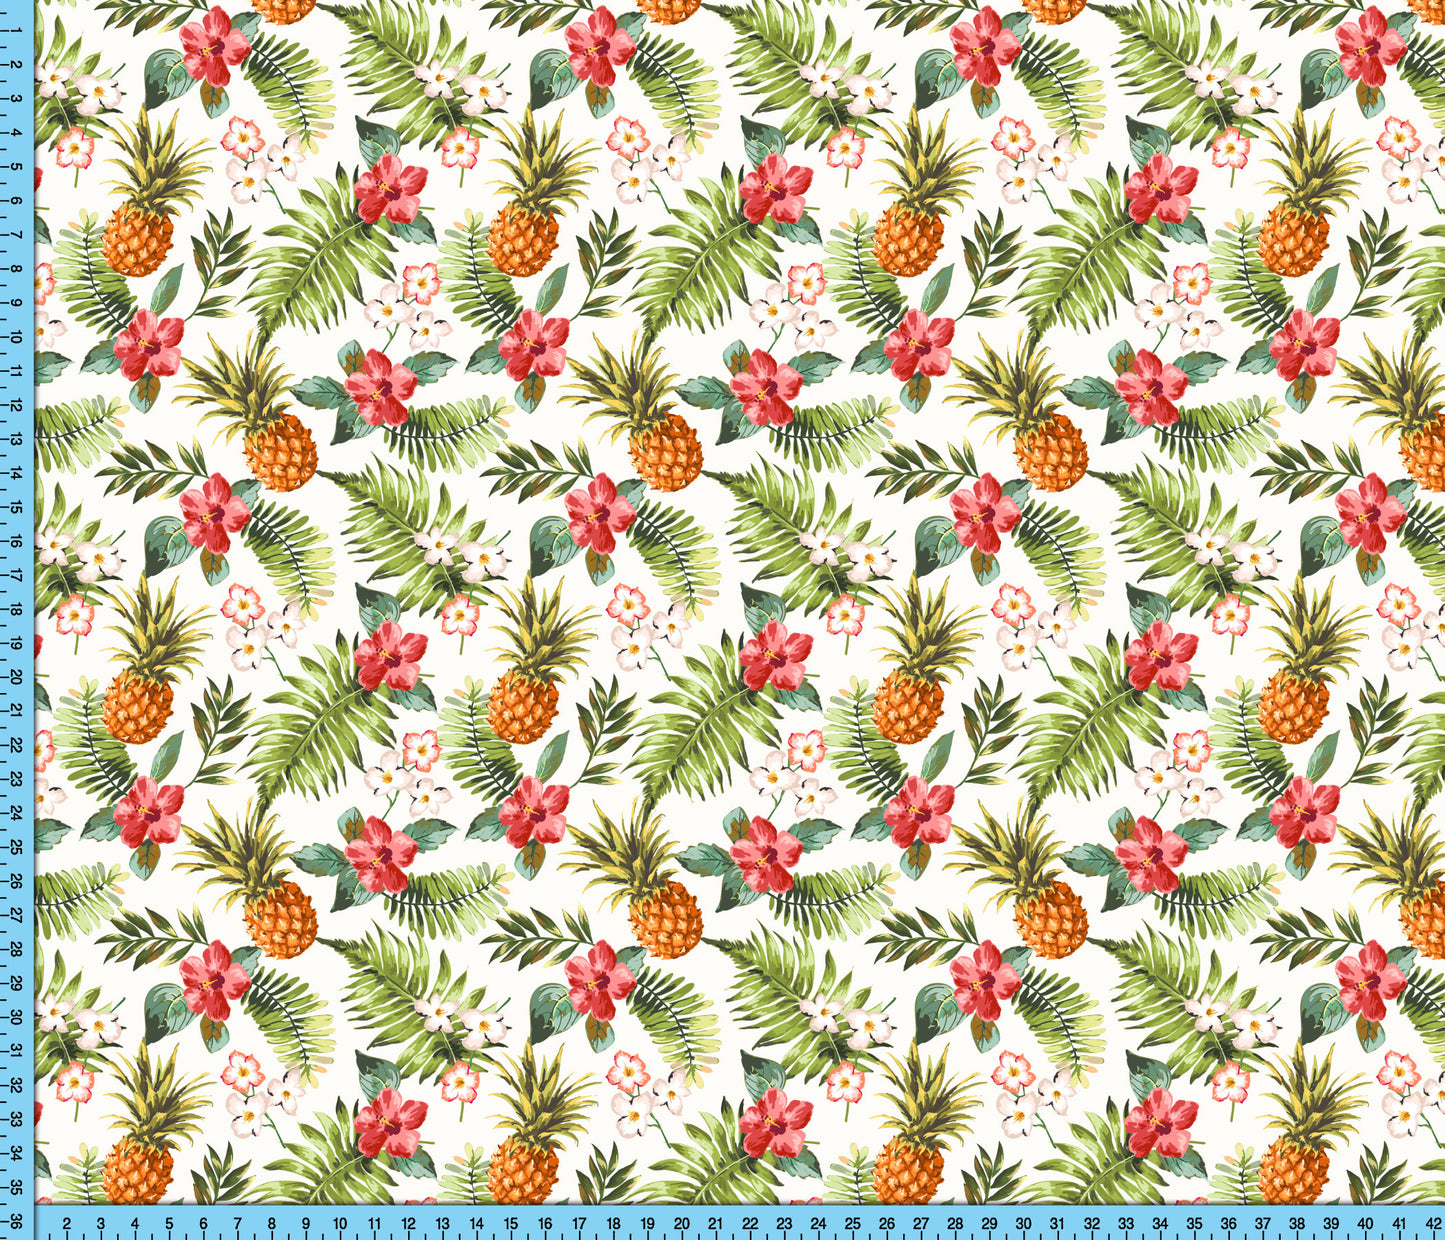 Tropical Pineapple and Hibiscus Flower Floral Print Fabric Pattern By the Yard